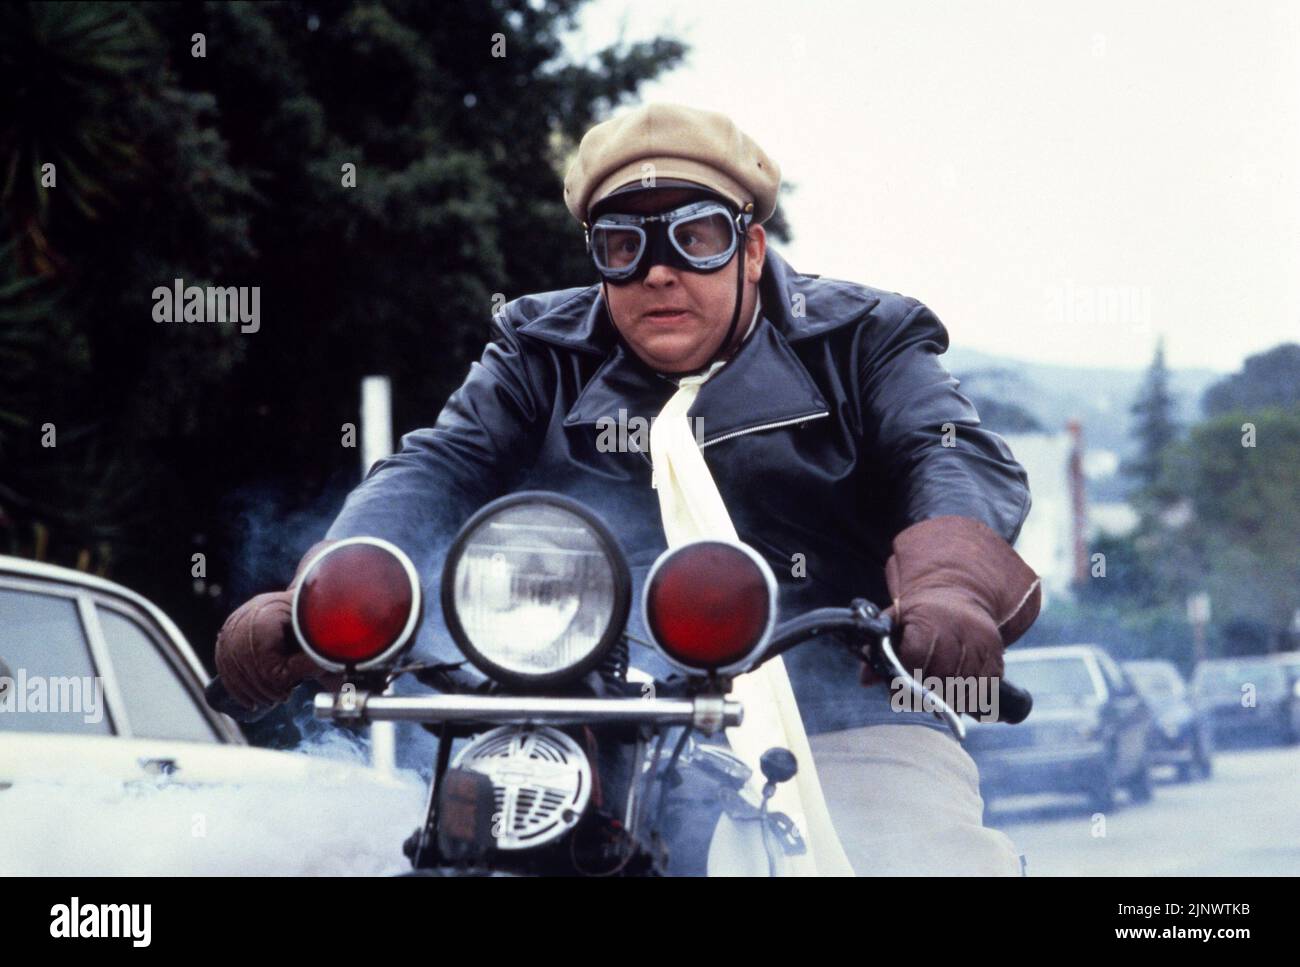 JOHN CANDY in ARMED AND DANGEROUS (1986), directed by MARK L. LESTER. Credit: COLUMBIA PICTURES / Album Stock Photo